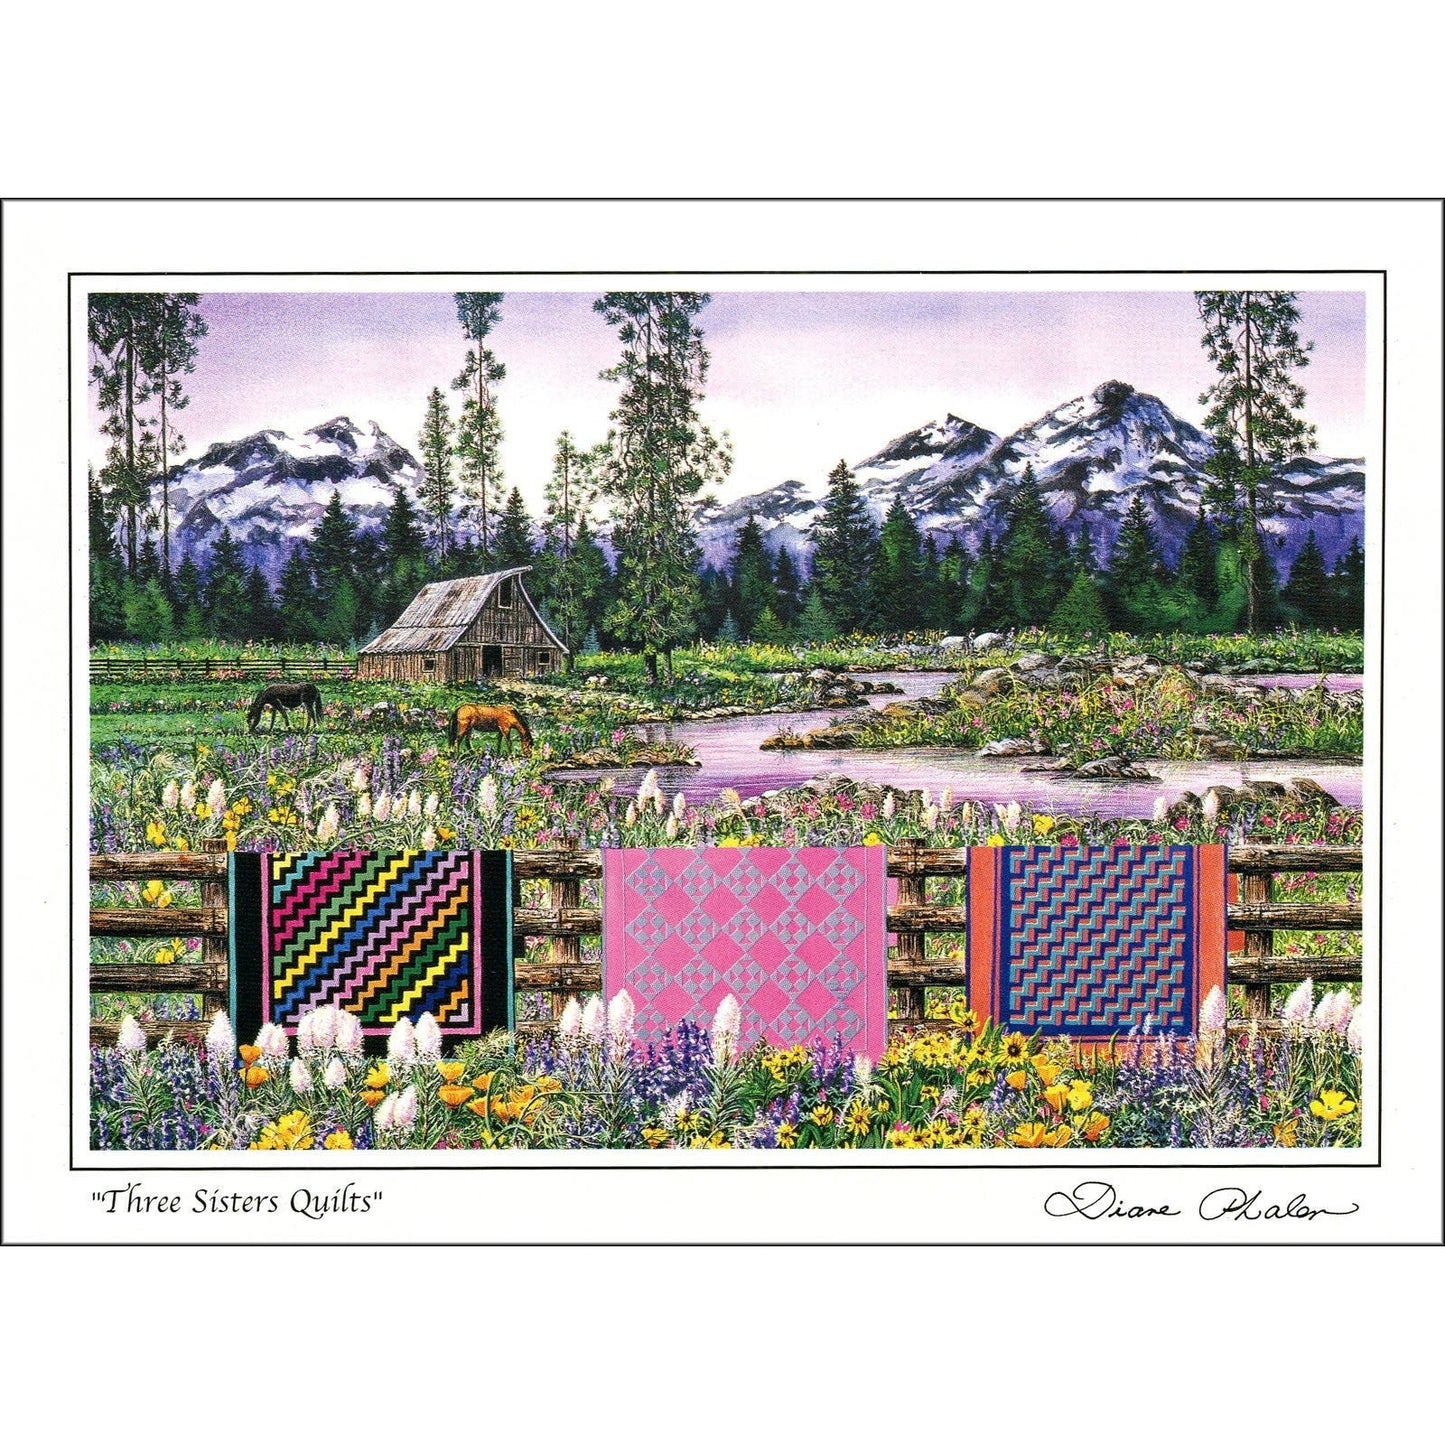 Quilt Themed 6 Note Card Set of Mountains & Quilts 3 different prints by Diane Phalen Watercolors